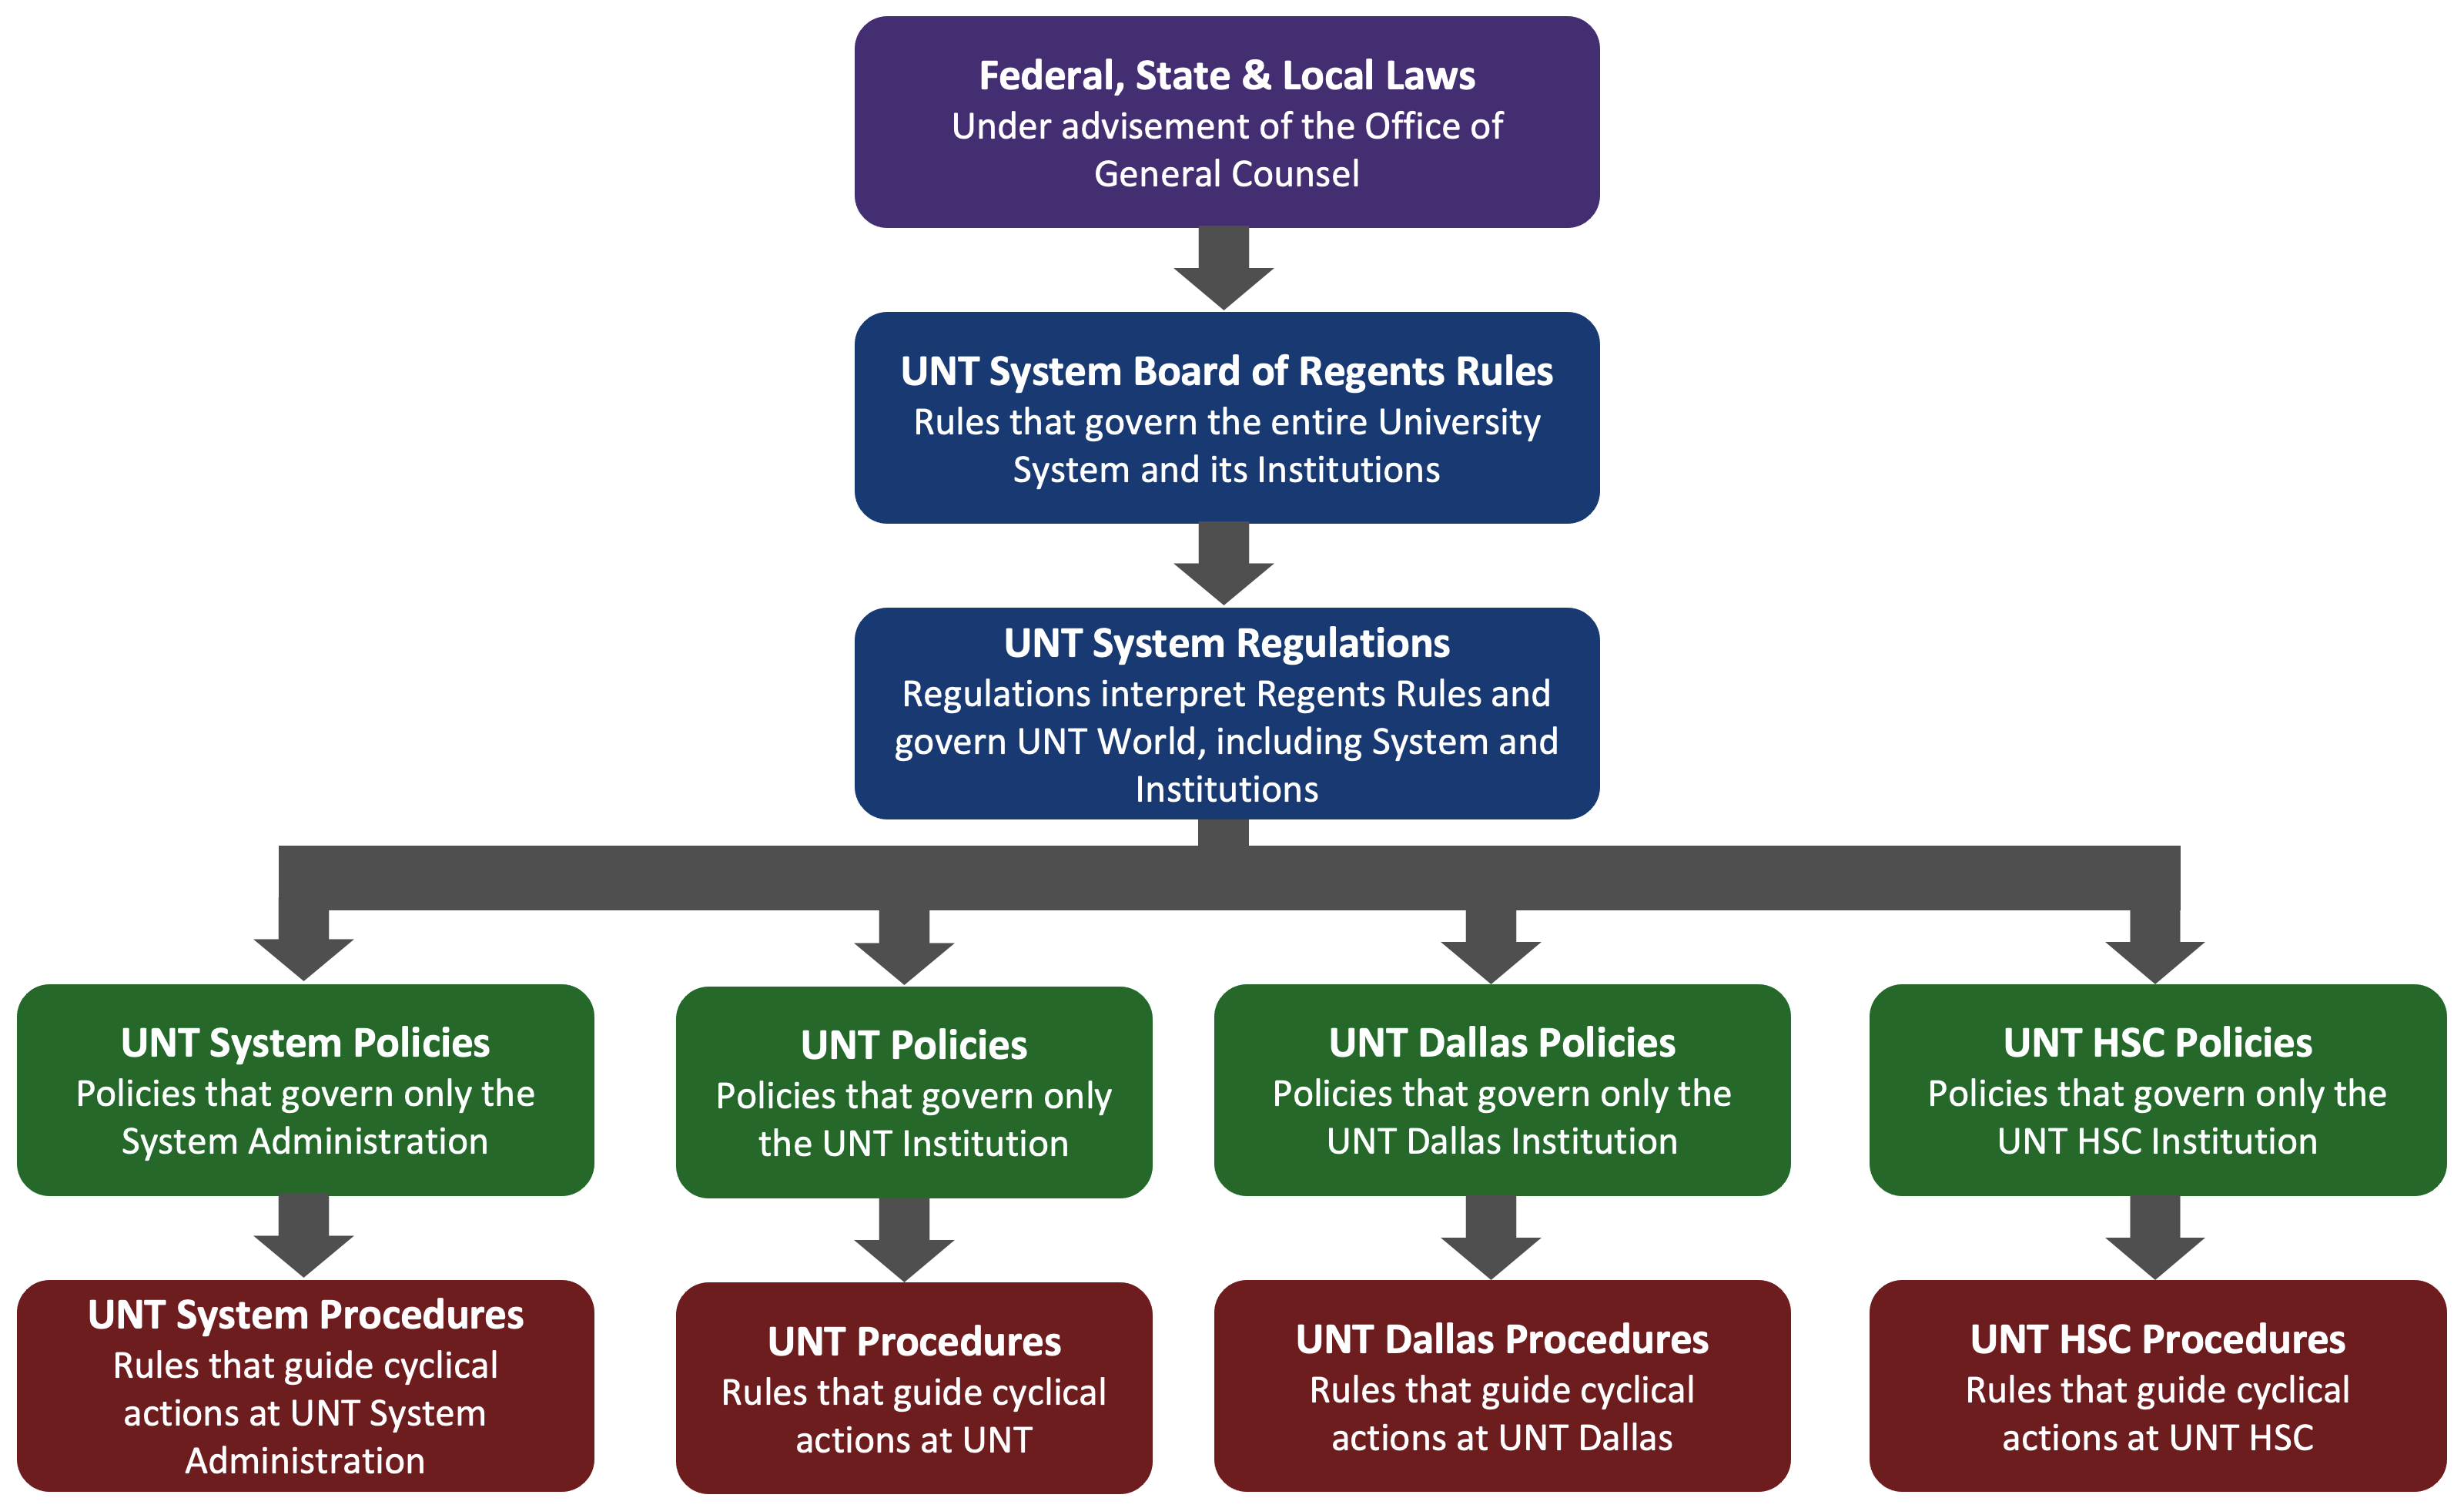 Hierarchical flow chart of laws, rules, regulations, policies, and procedures